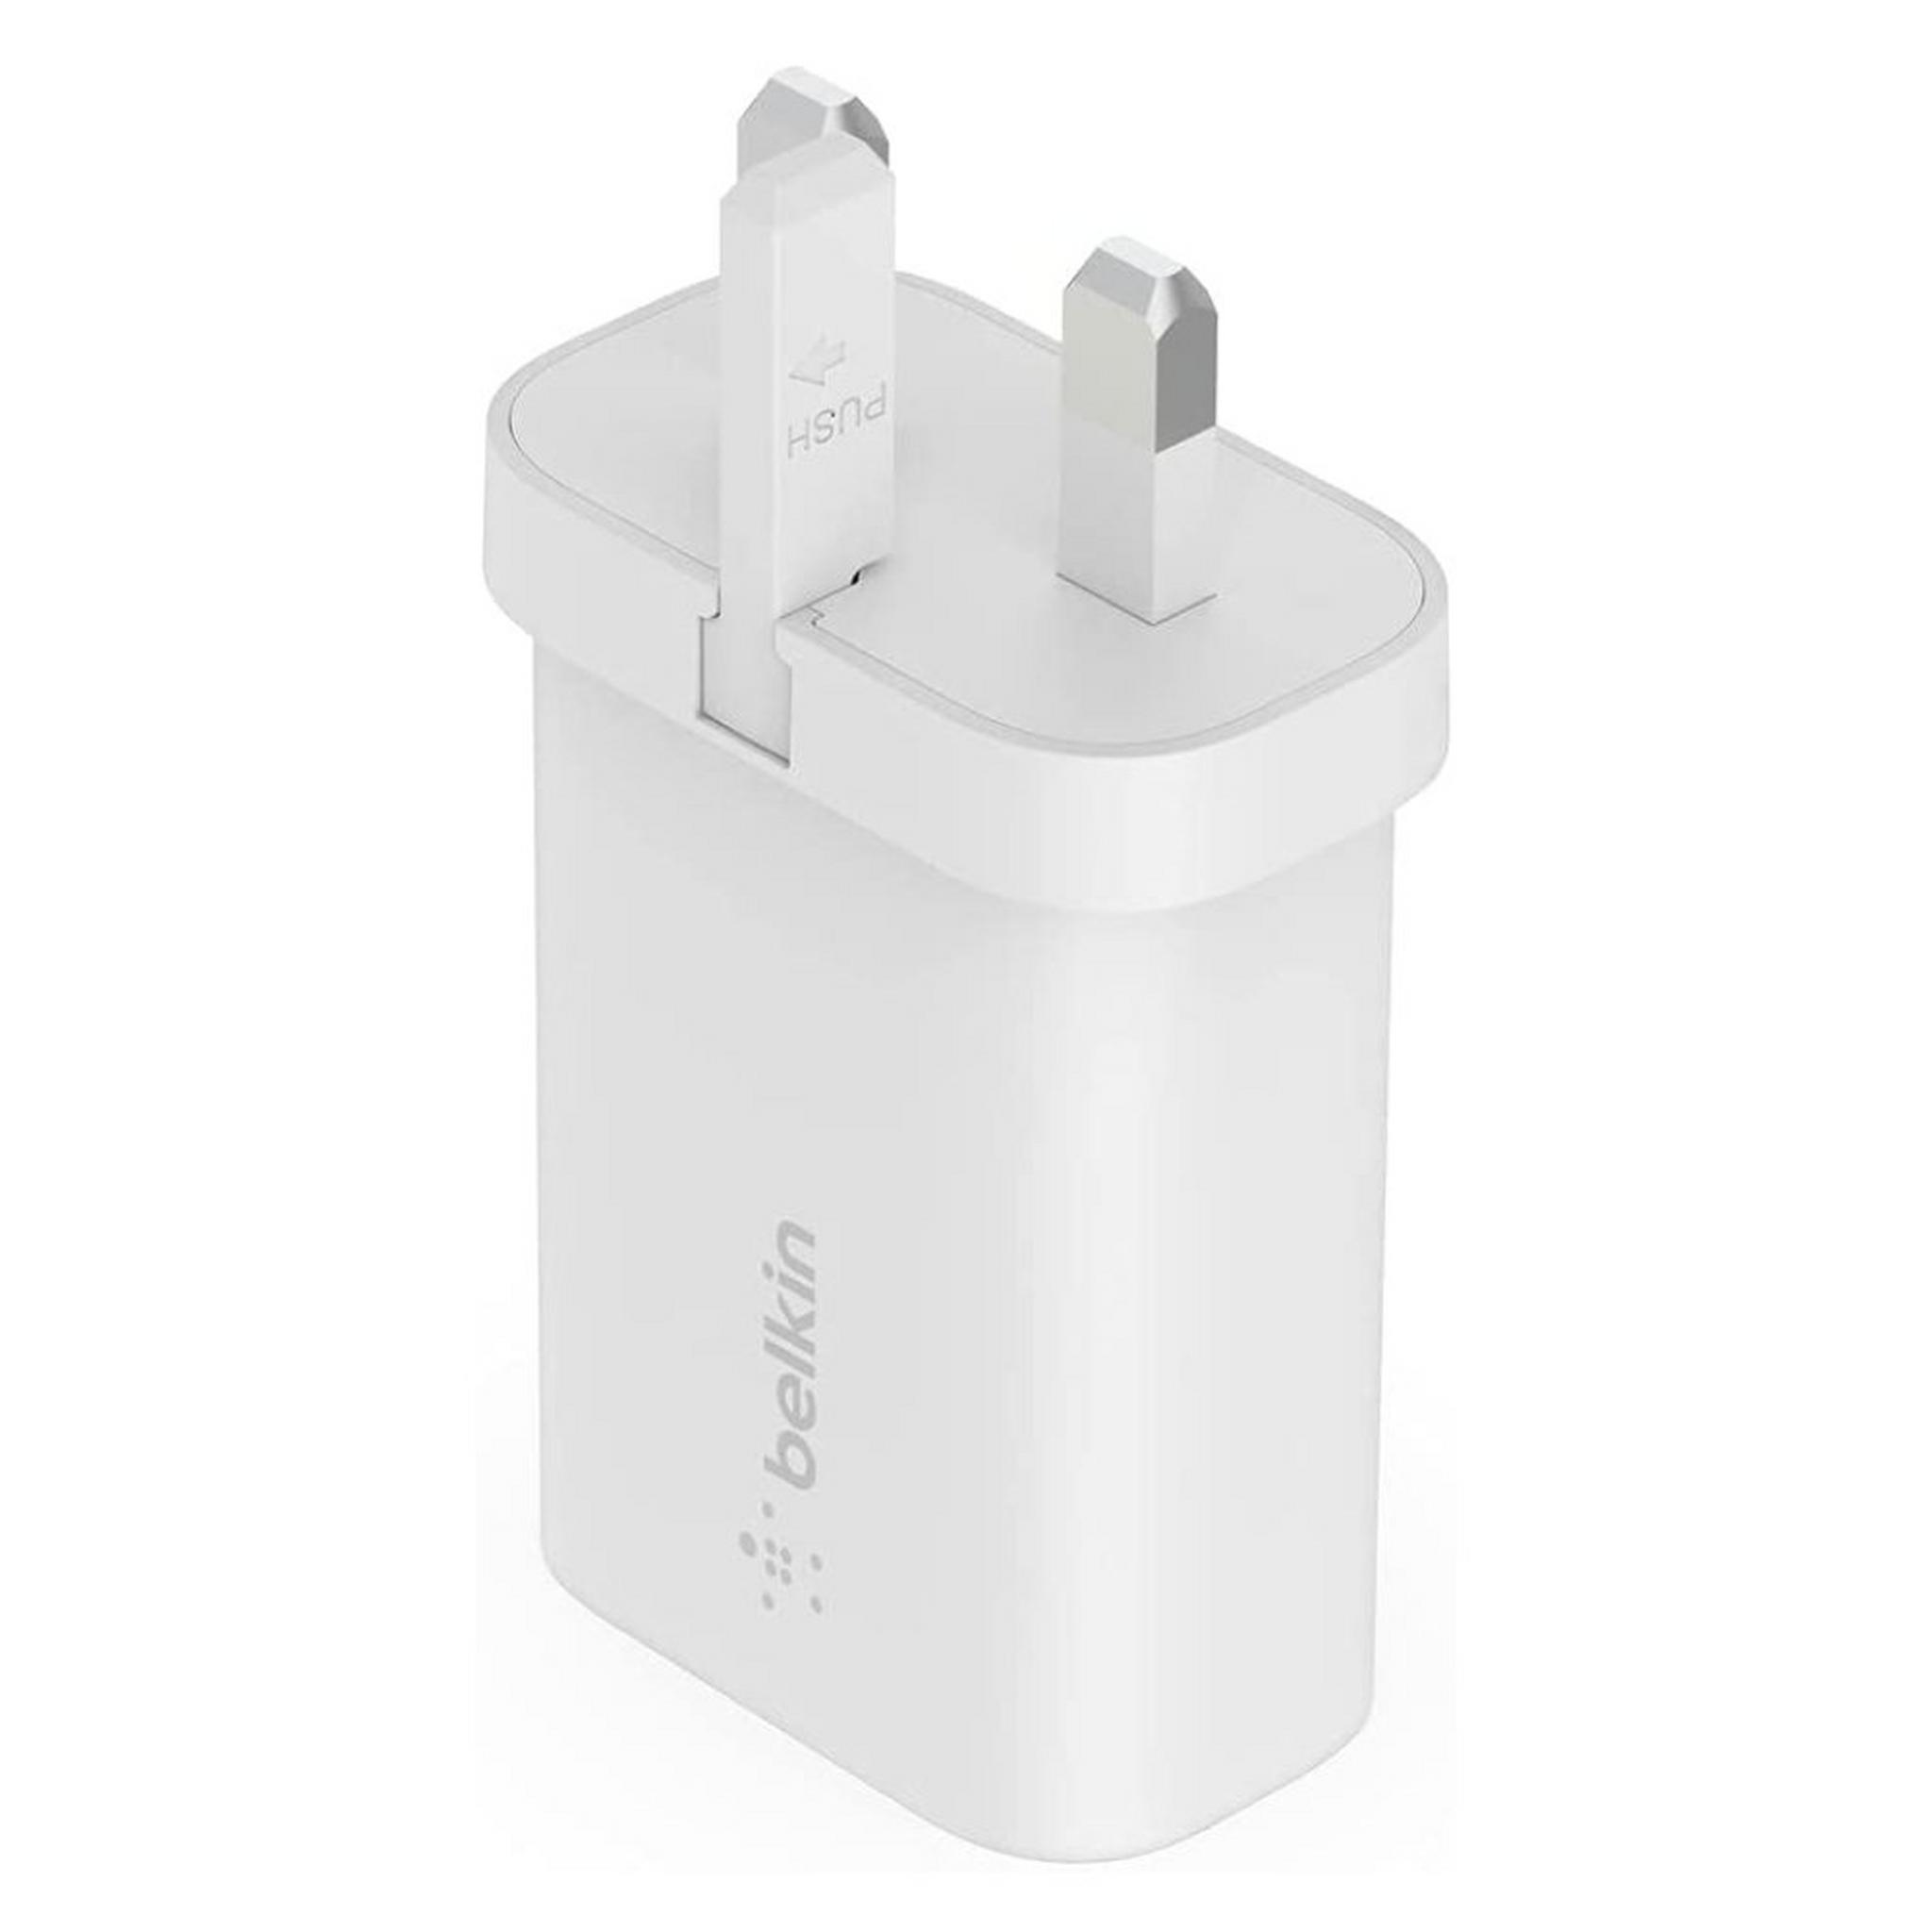 Belkin USB-C PD 3.0 PPS Wall Charger 25W + USB-C Cable